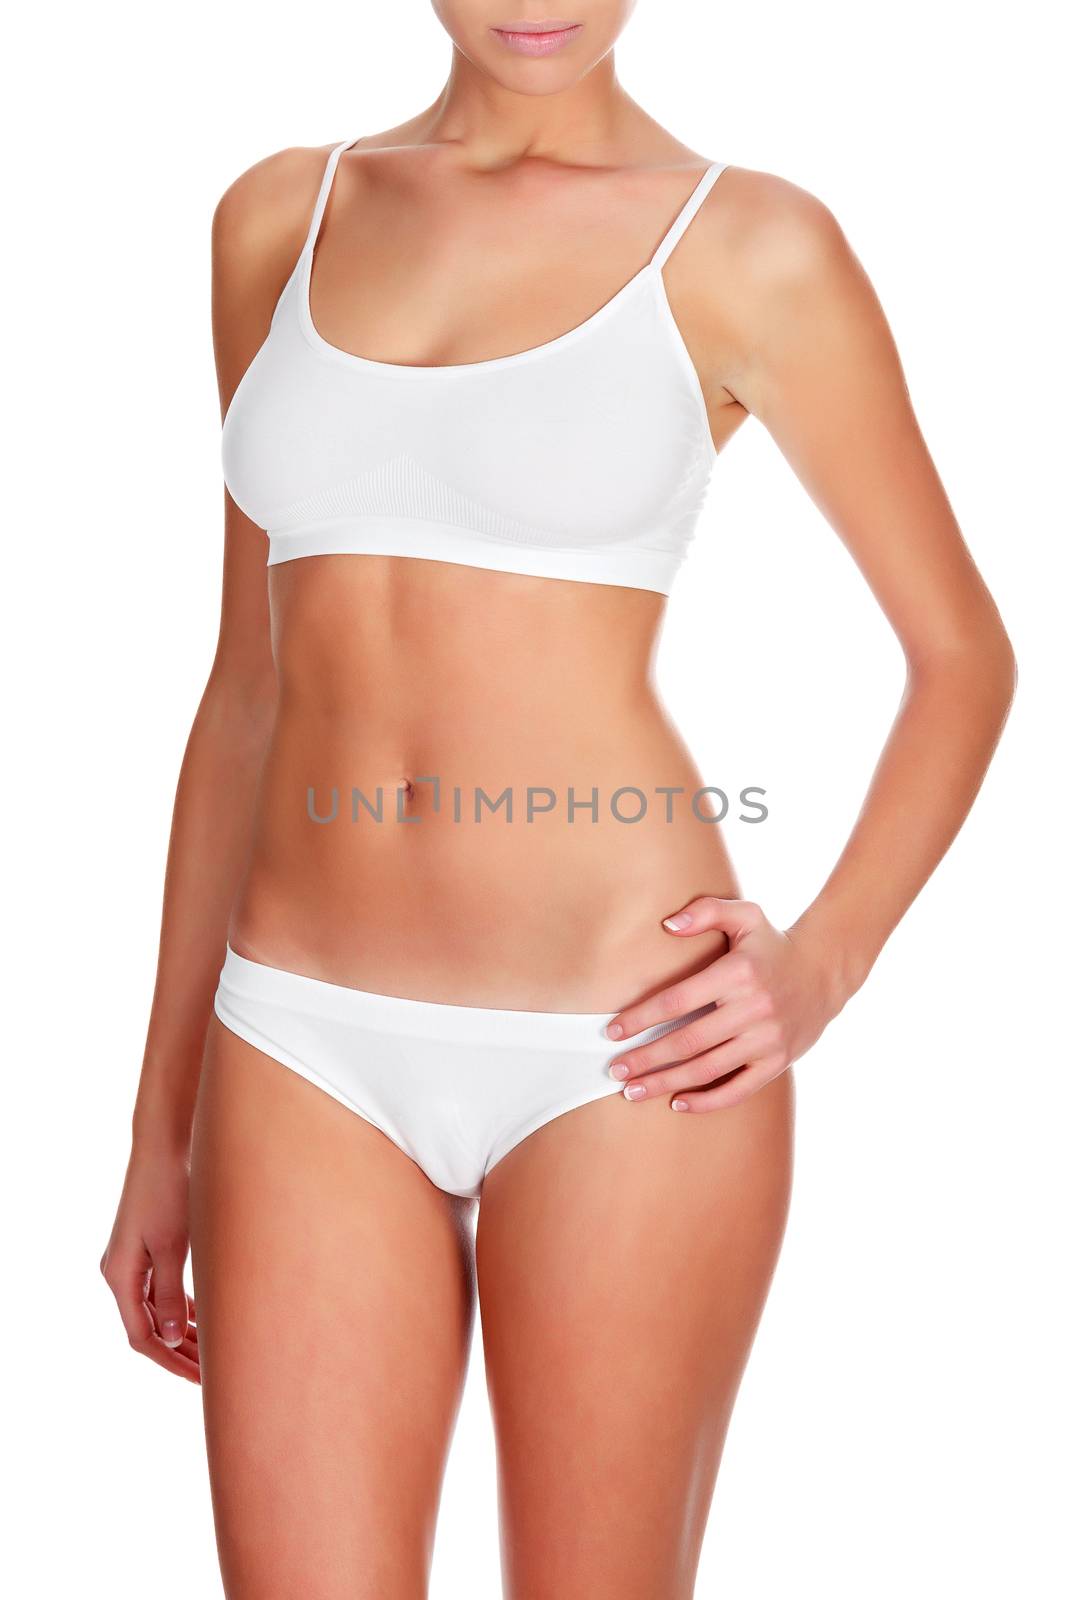 Slim woman body on white background, isolated by Nobilior